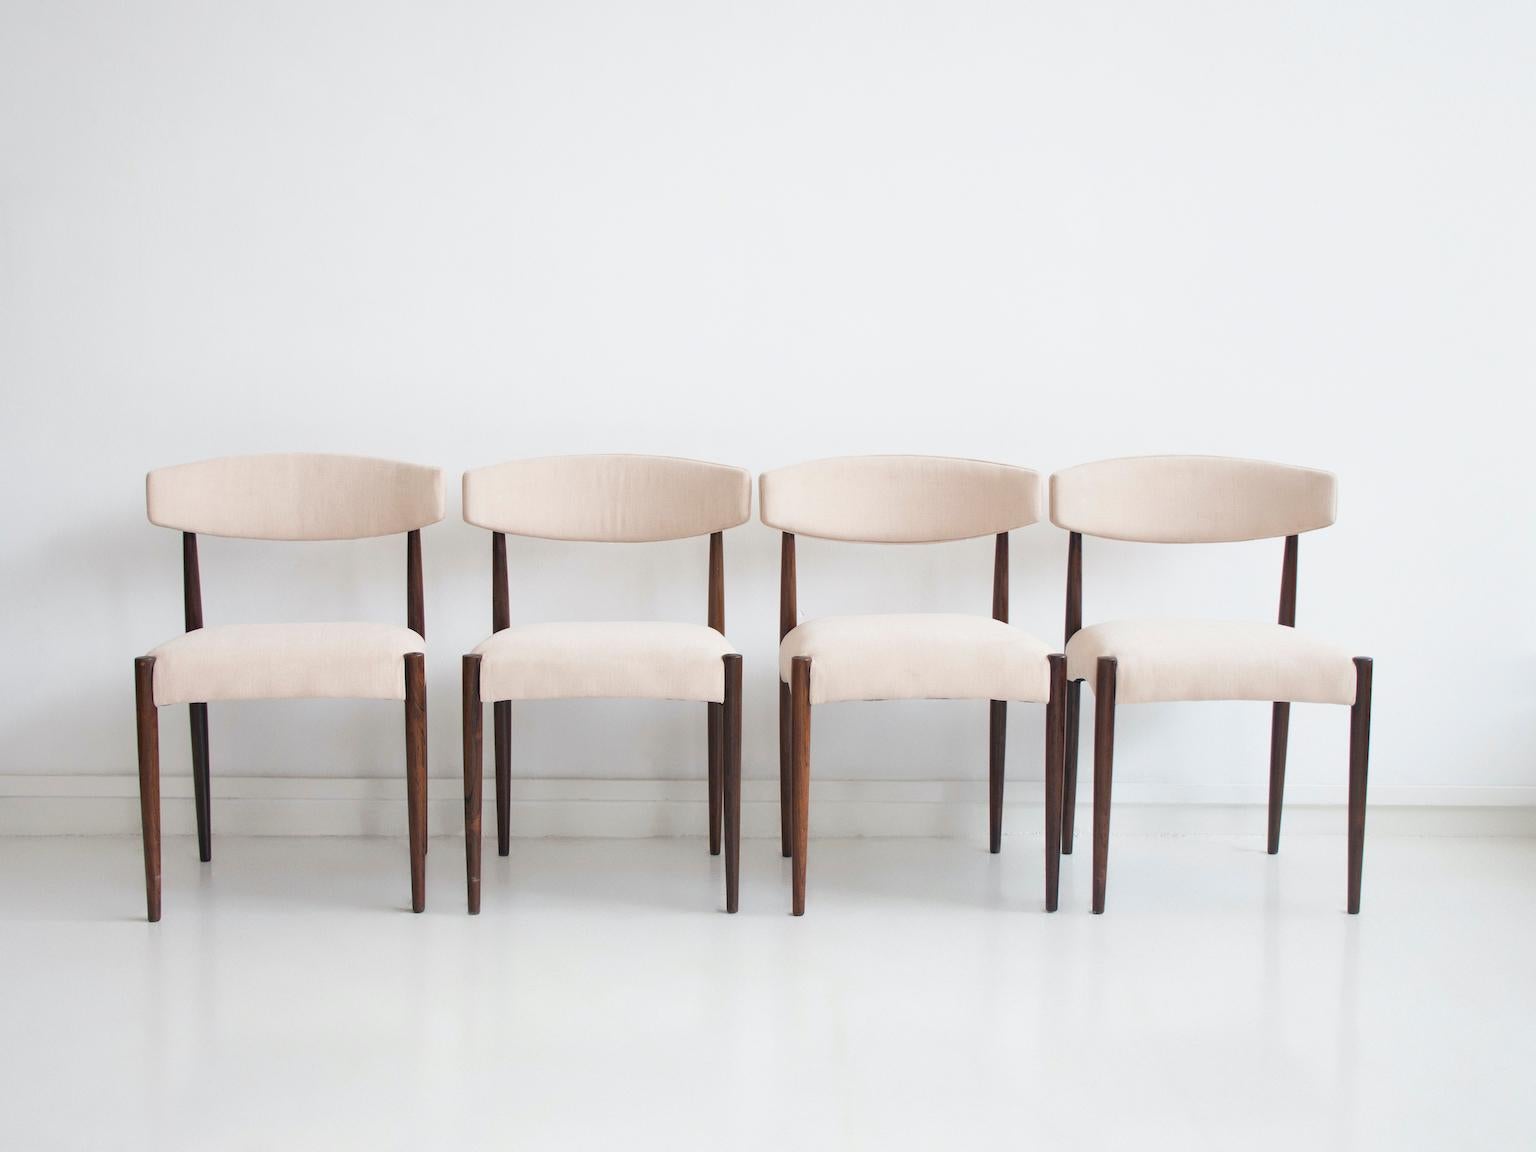 Set of four dining chairs made in Denmark circa 1960. The frame with slender legs is made of kingwood. Seat and backrest with later upholstery in light colored fabric.